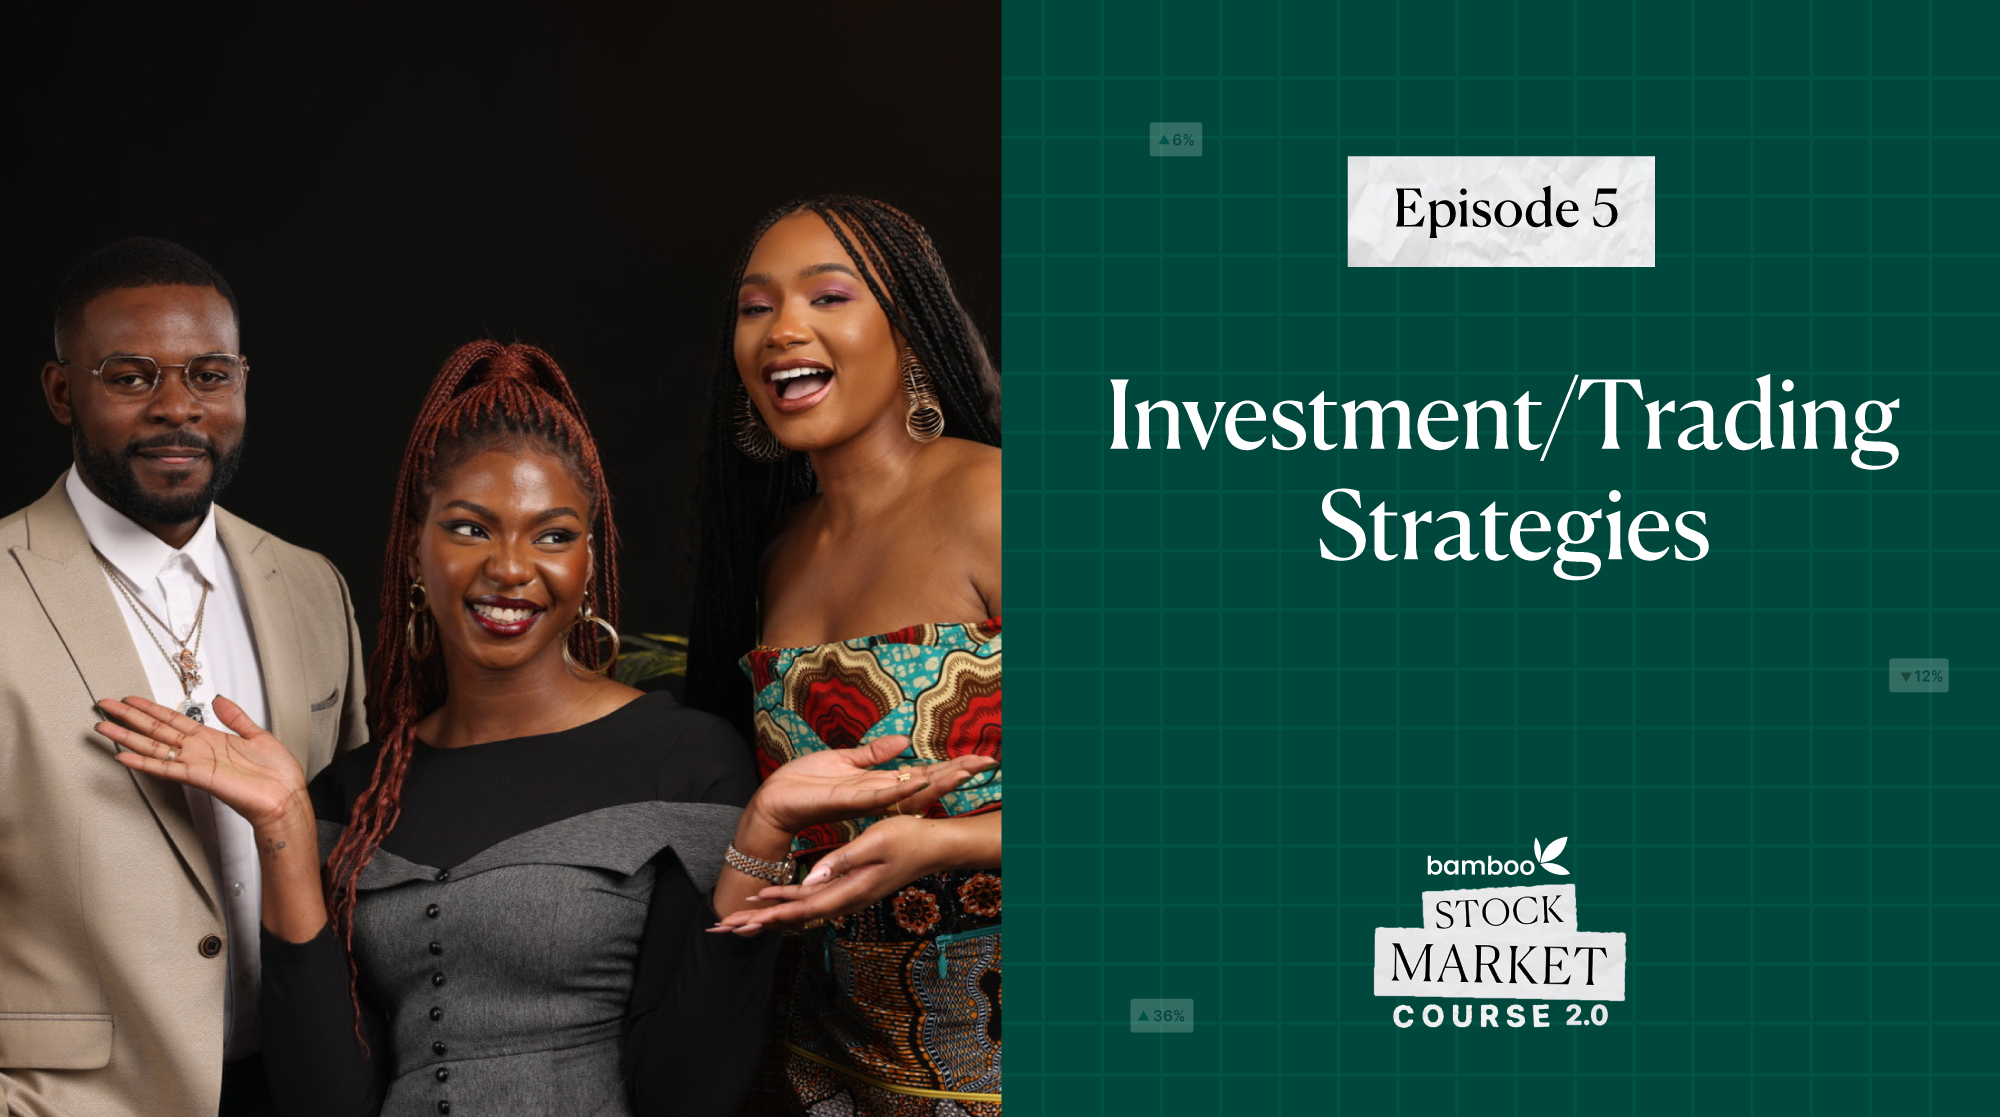 Episode 5 - Investment Trading Strategies - Bamboo Stock Market Course - Learn How To Make Money From The Stock Market - Invest Bamboo